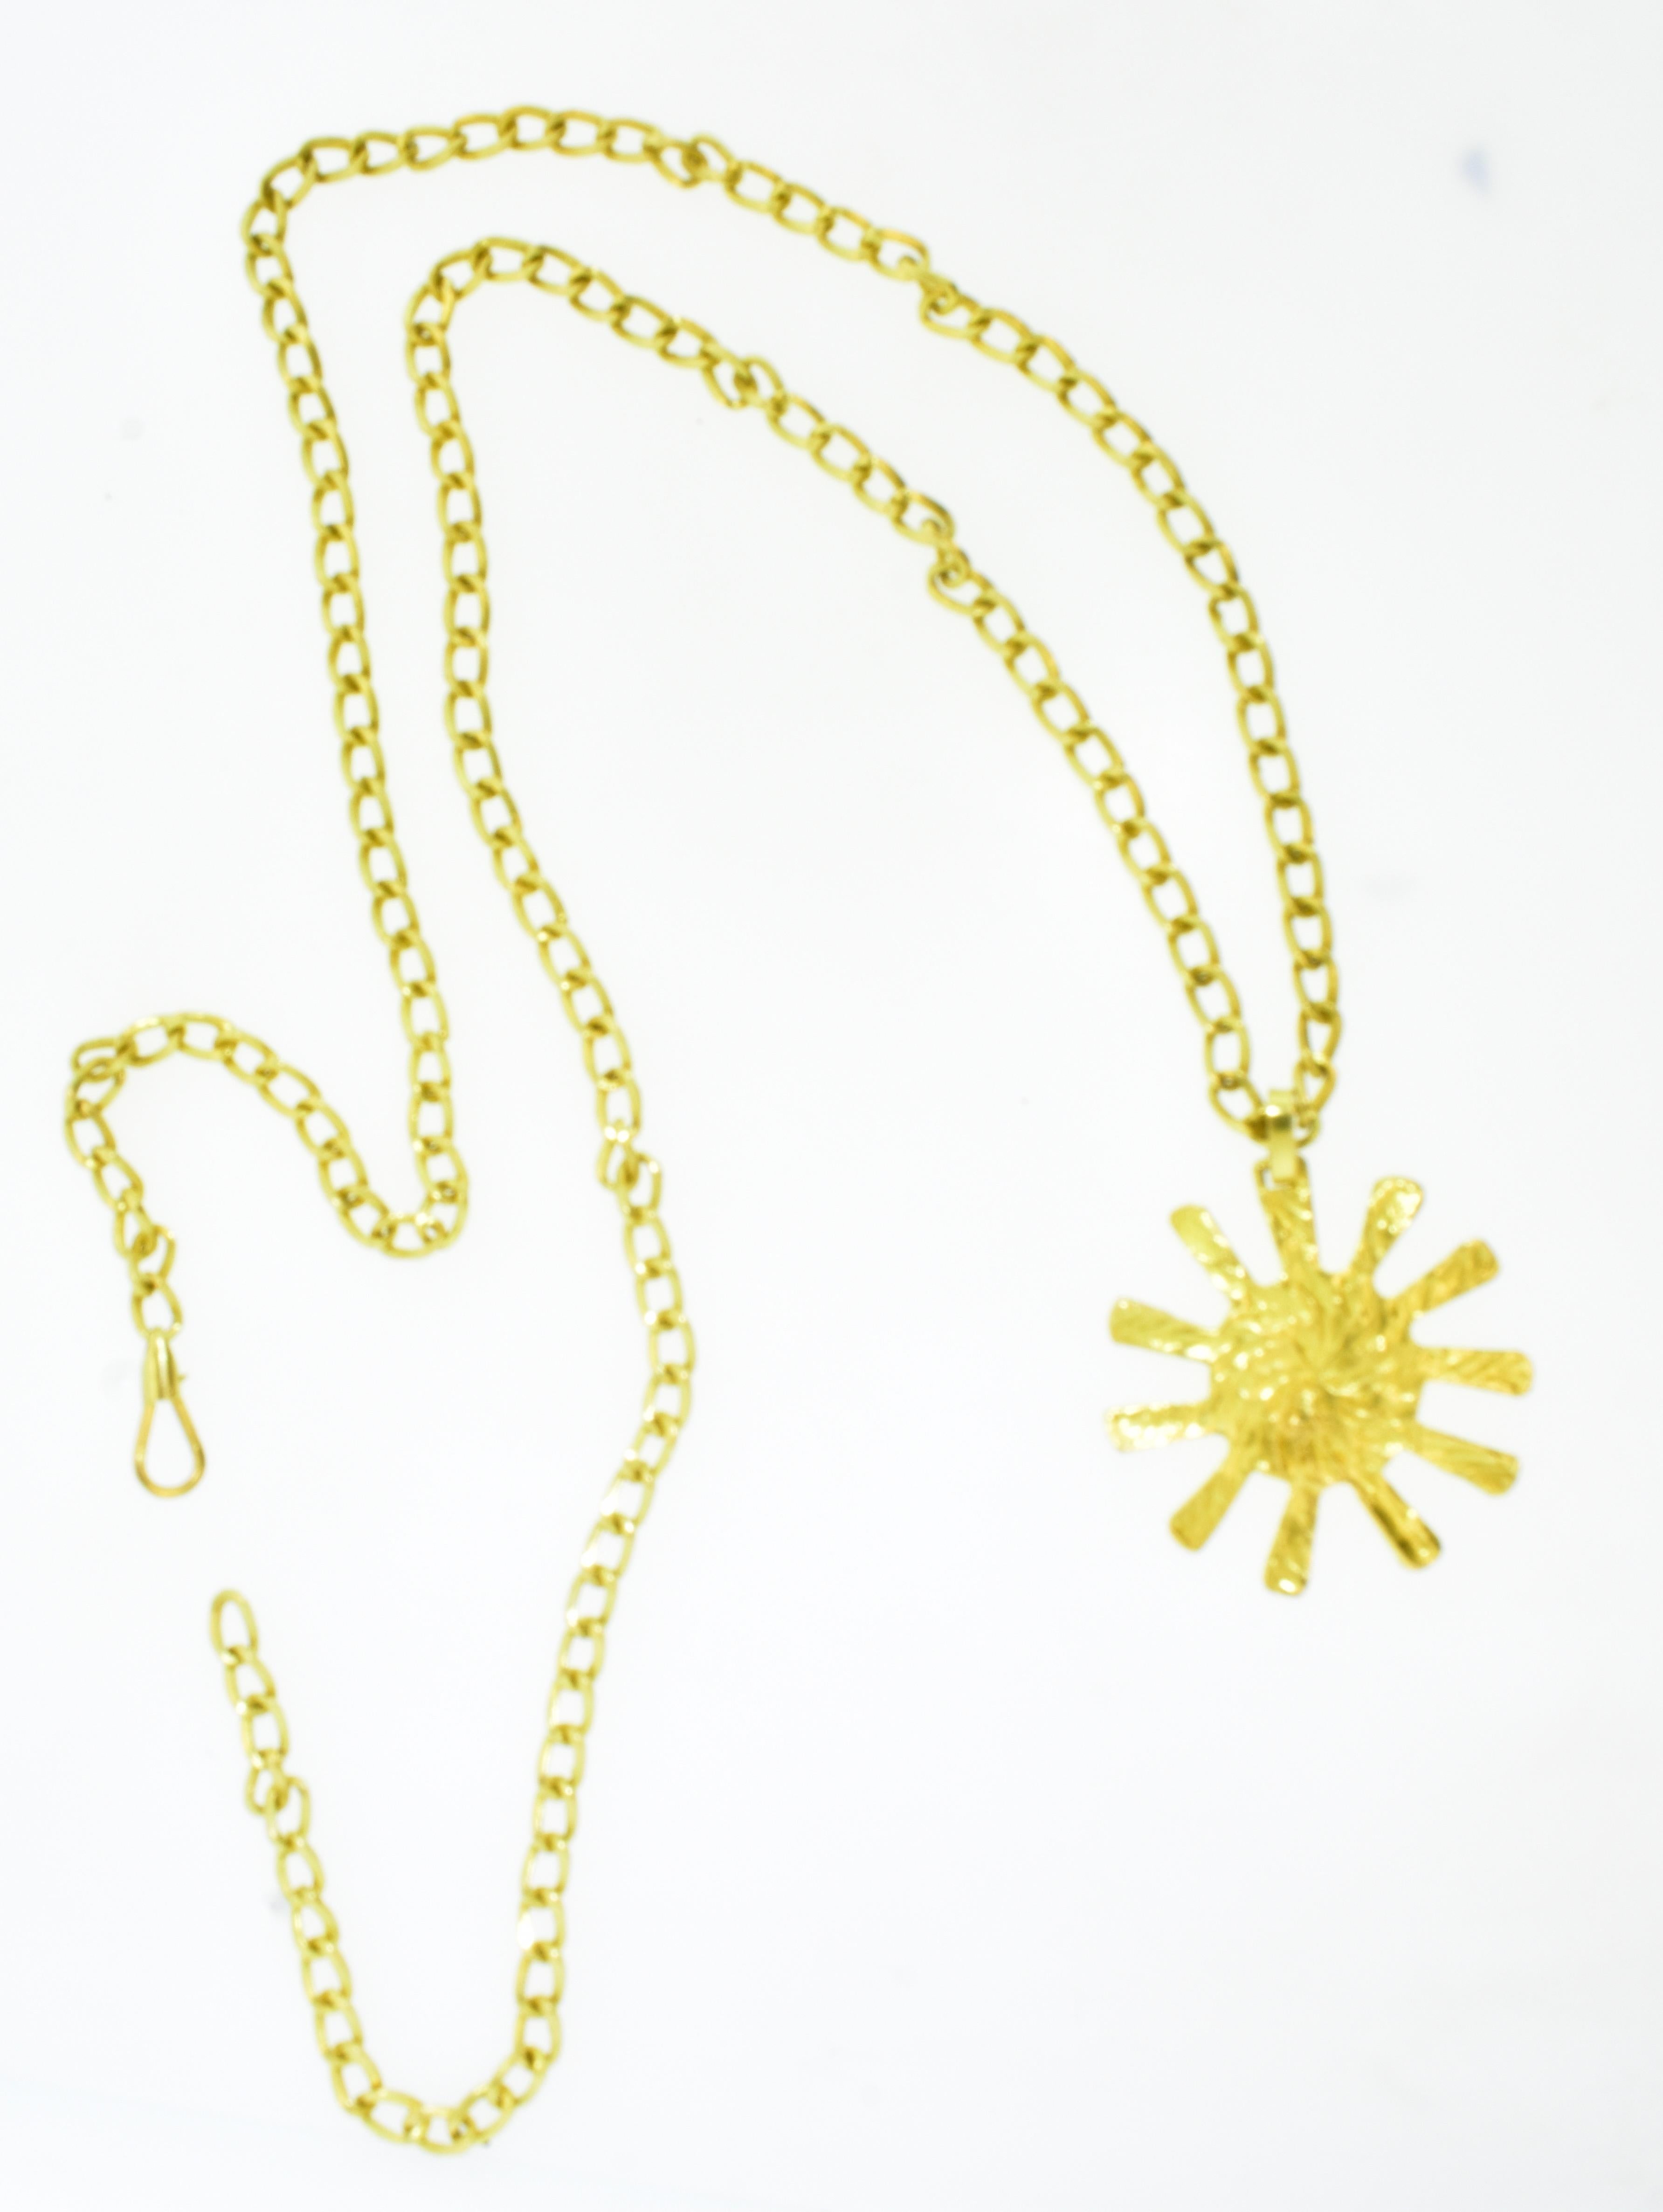 18K chain and sun pendant by Bvlgari, Italy, c. 1990.  This heavy long chain is 36 inches and terminates with Bvlgari's sun motif pendant which is 2.25 inches long.  The necklace weighs 108.63 grams and is signed on the clasp.  This is a vintage